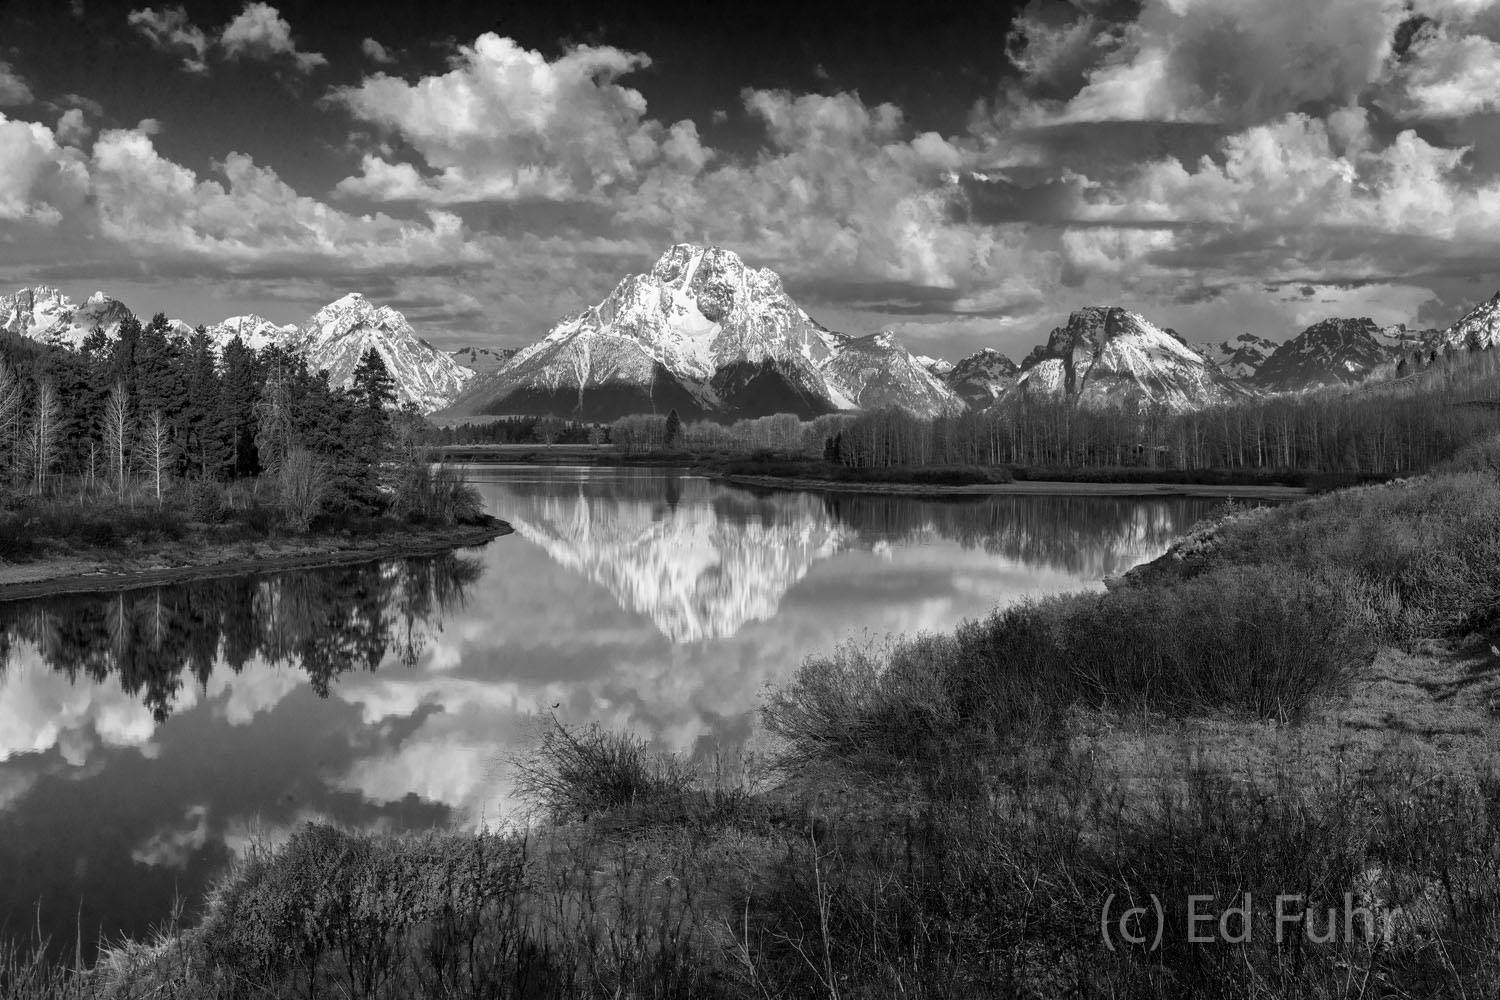 One of the great vistas in any of our National Parks, Oxbow Bend is as stunning in black and white as it is in color.